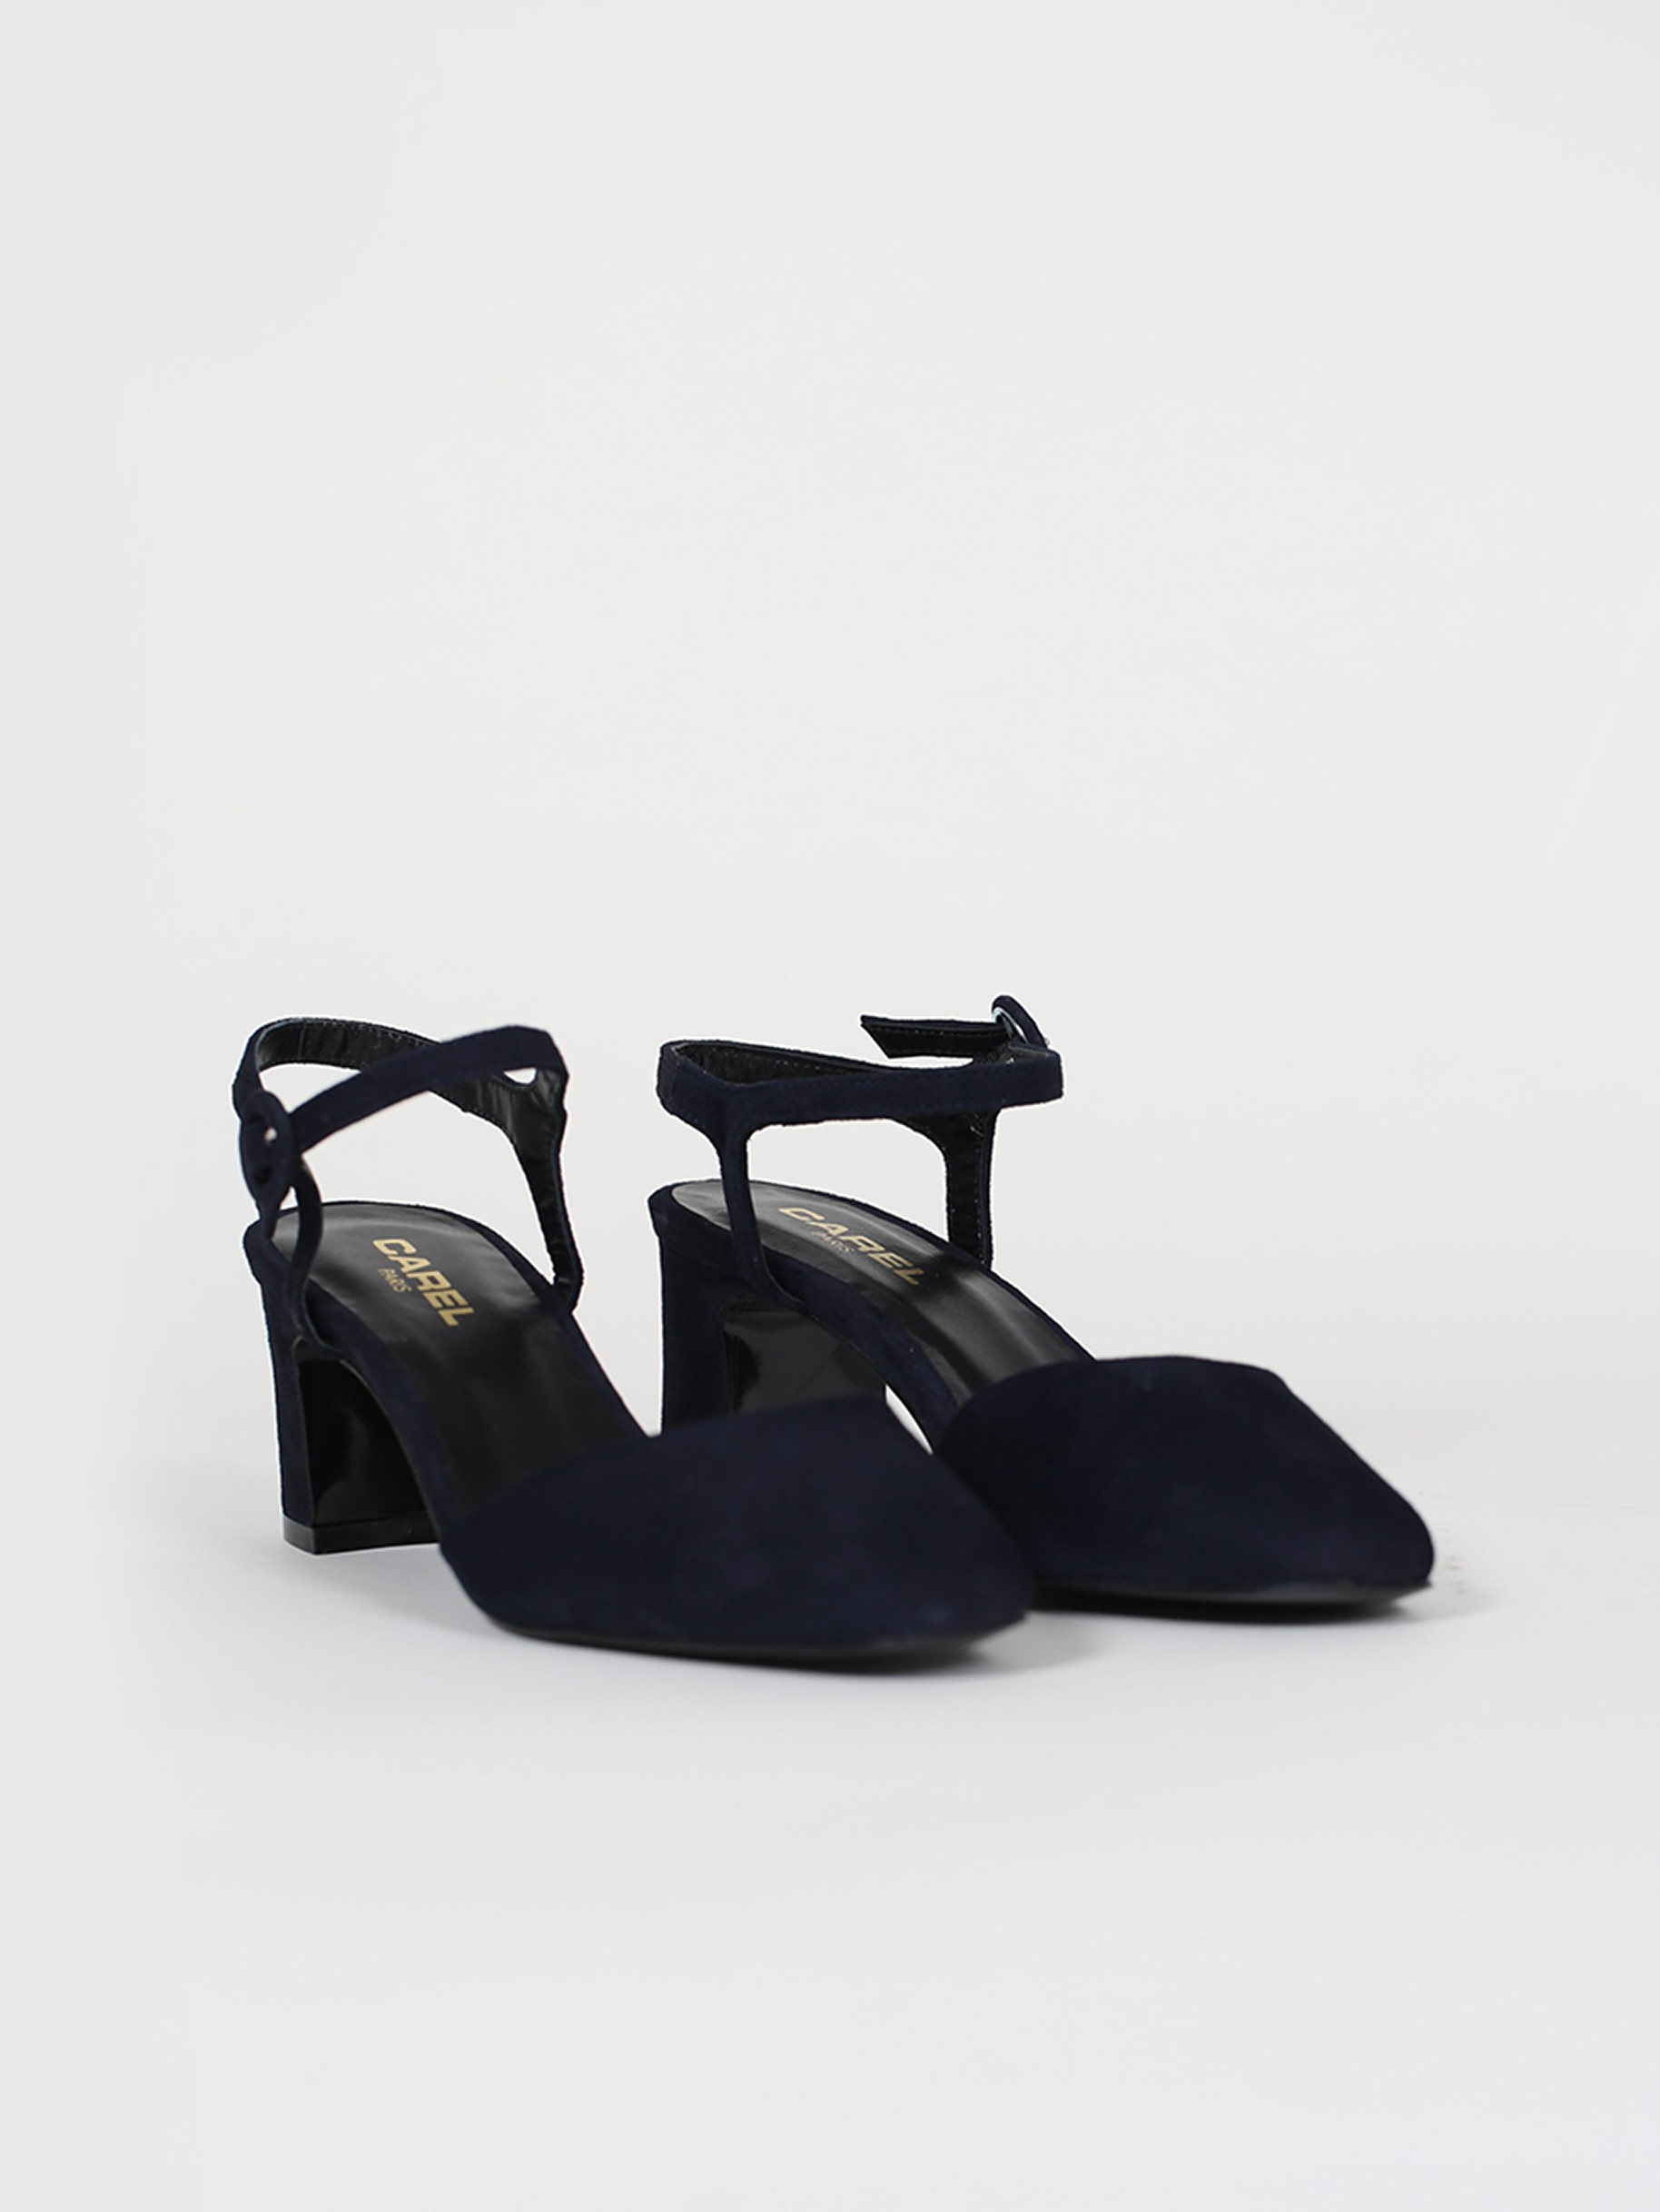 Blue suede leather sandals